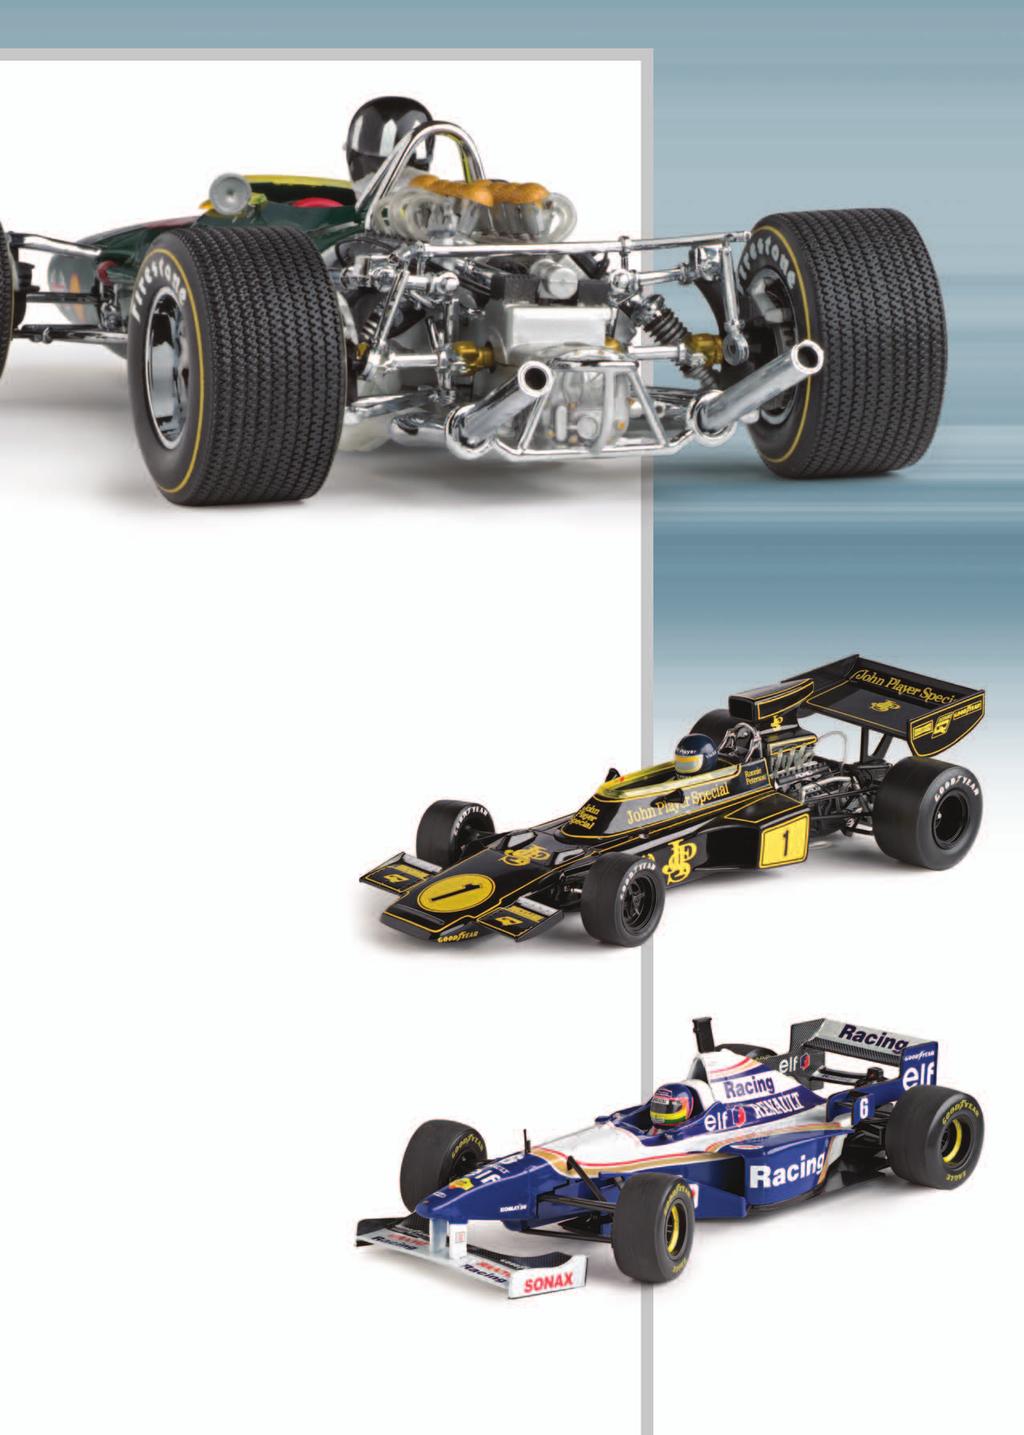 1:18 SCALE The new Quartzo Collection presents the most significant cars in Formula 1 history, faithfully reproduced in 1:18 scale. All models have numbered, limited edition certificates.